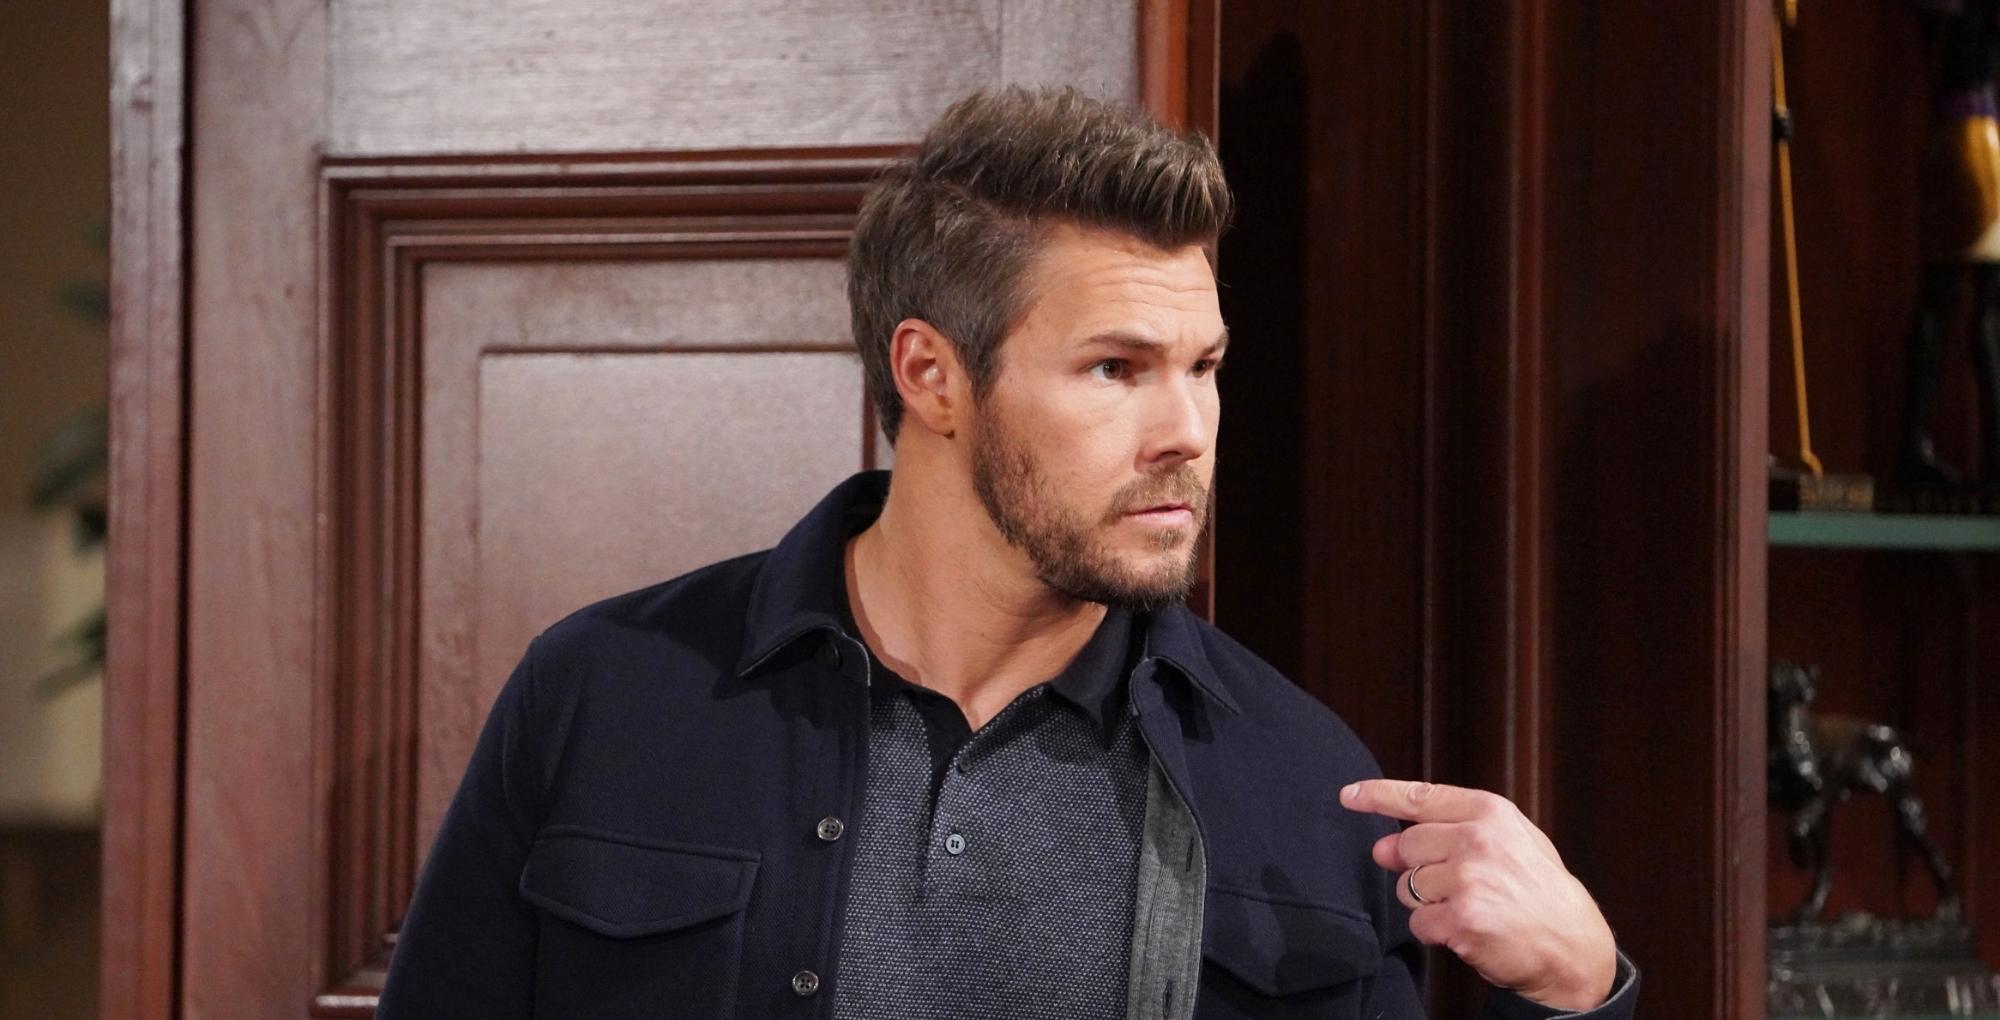 bold and the beautiful spoilers for may 19, 2023, show liam wants to talk with thomas.